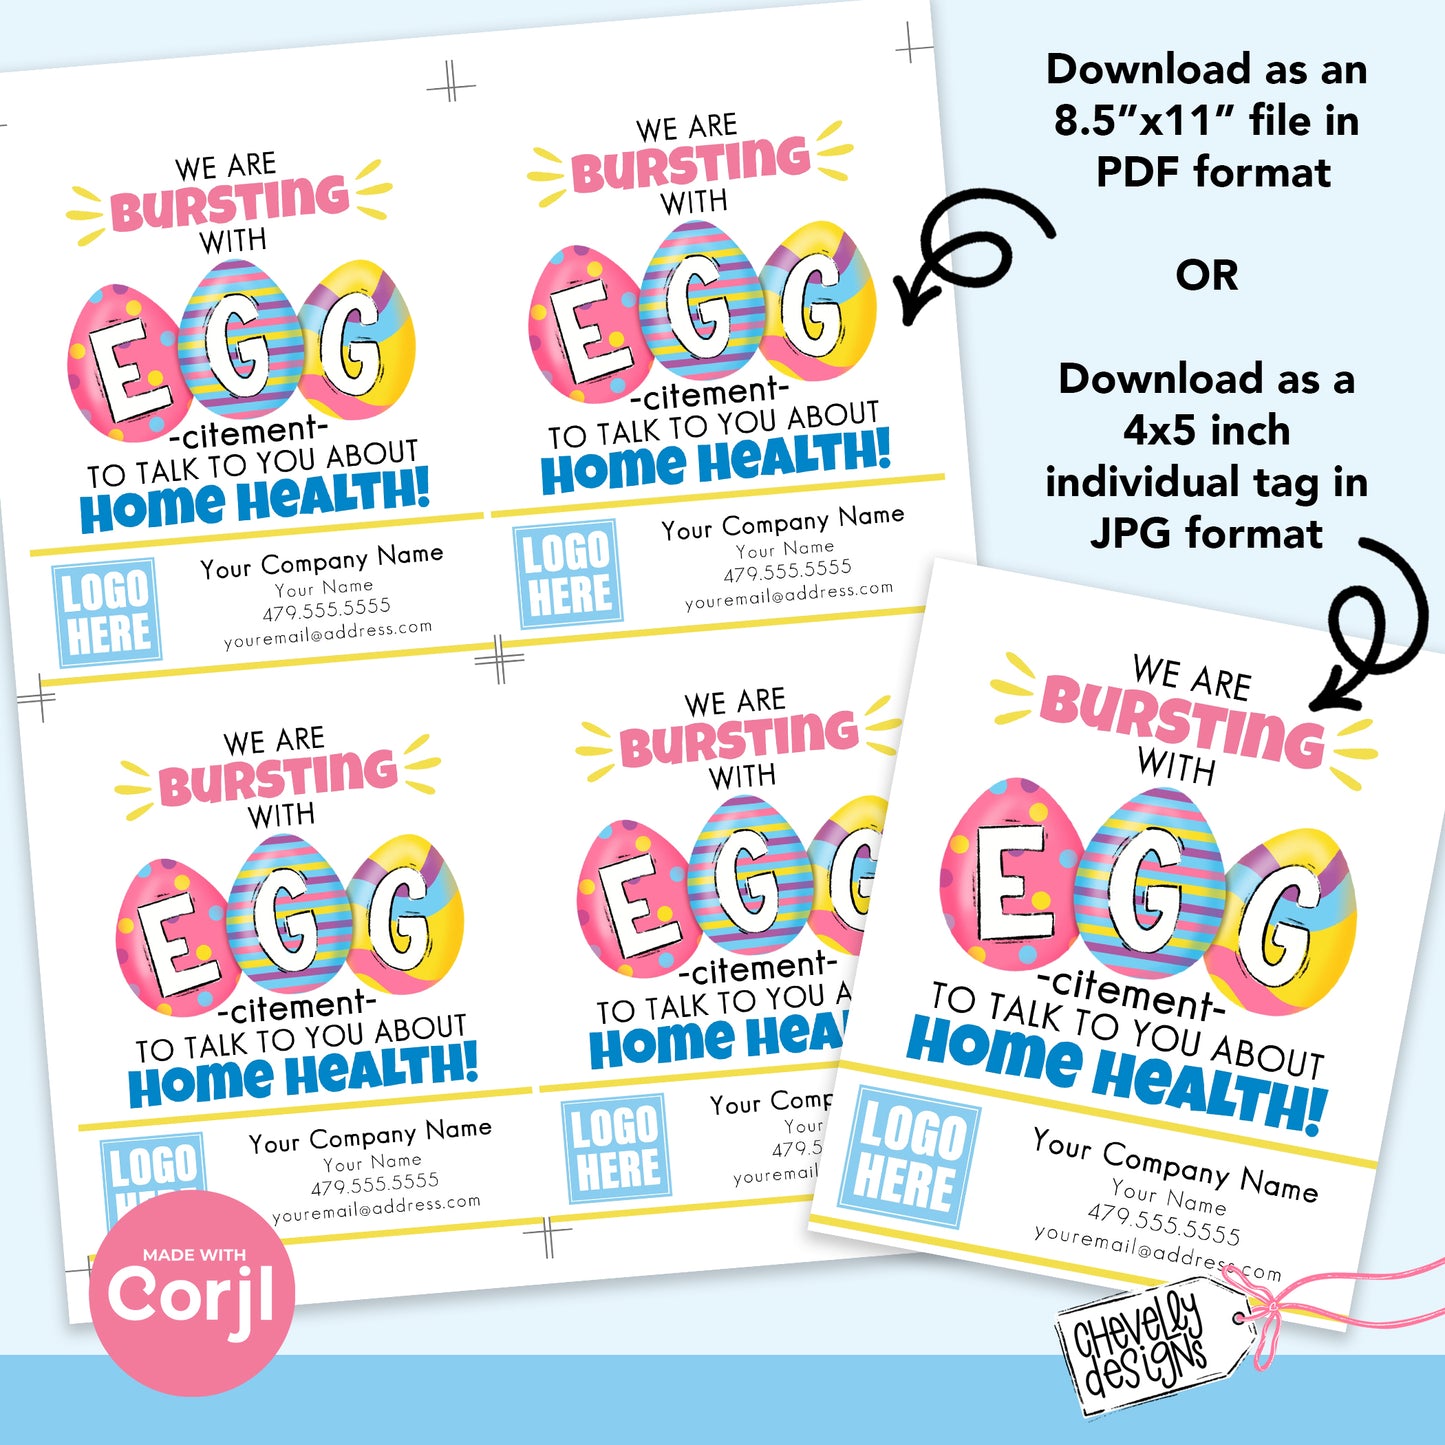 EDITABLE - We are Bursting with EGG-citement - Easter Referral Marketing Gift Tag - Printable Digital File